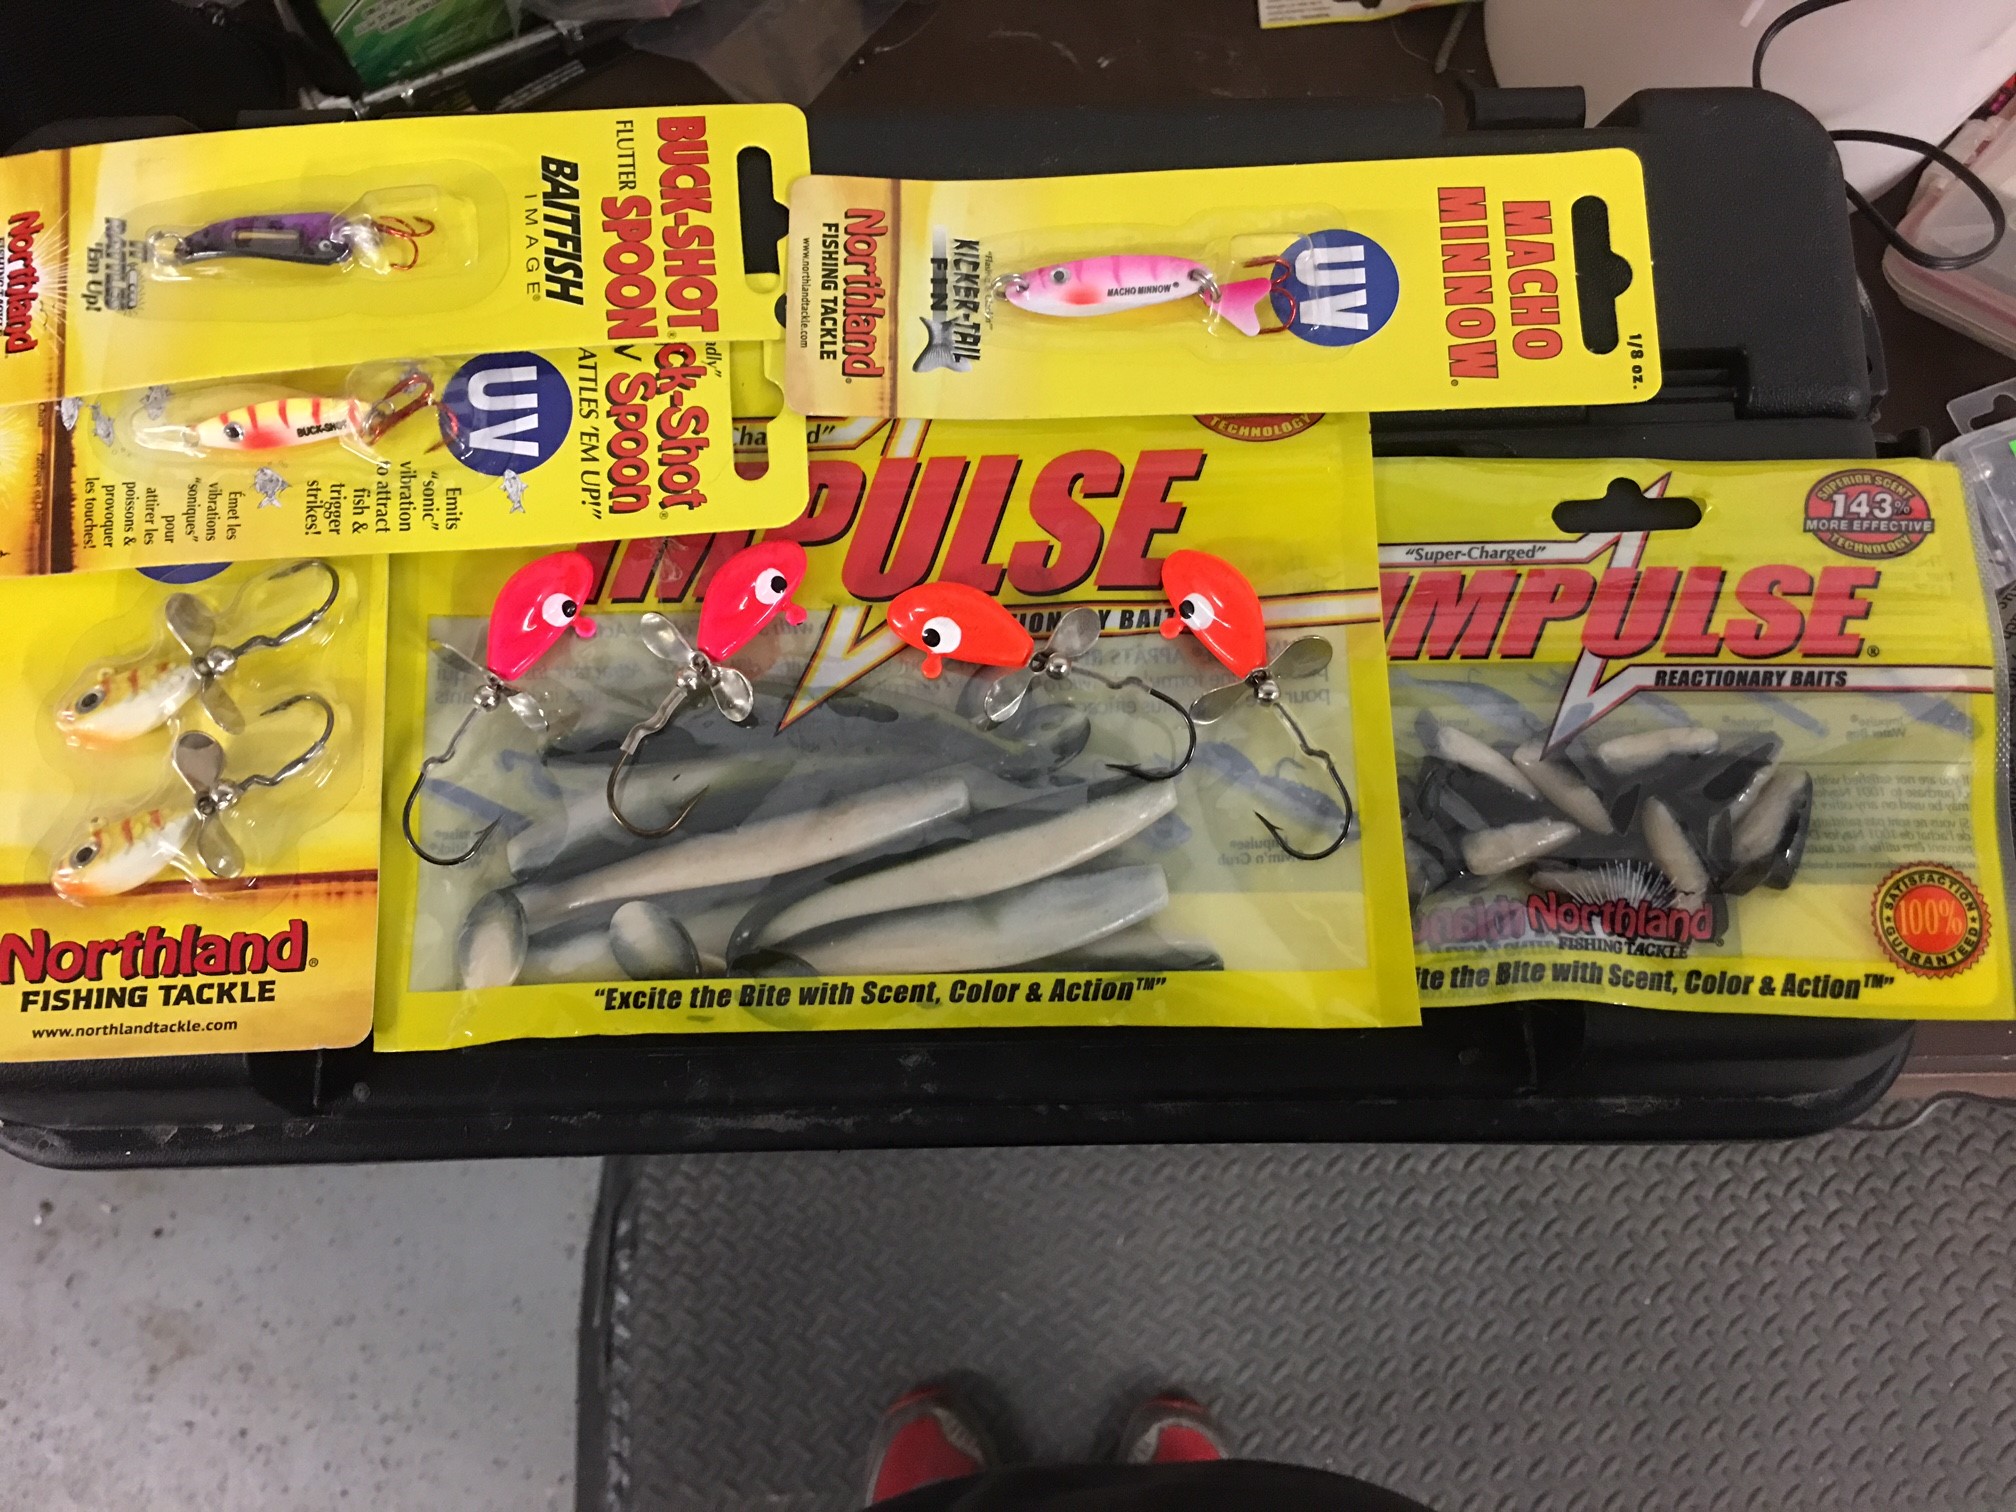 Northland Fishing Tackle items.